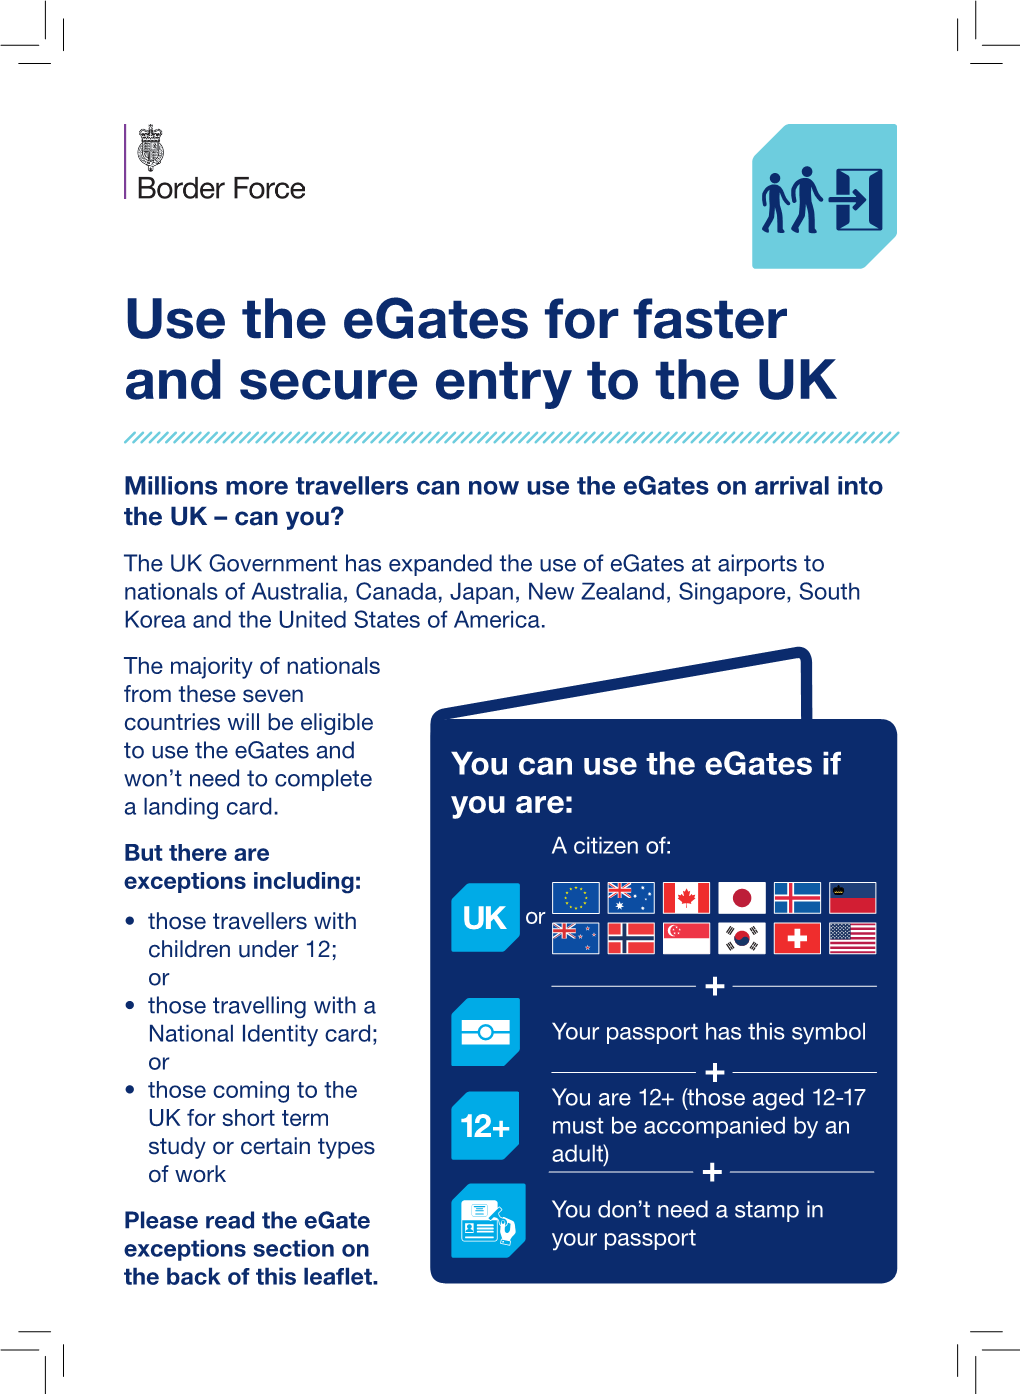 Use the Egates for Faster and Secure Entry to the UK